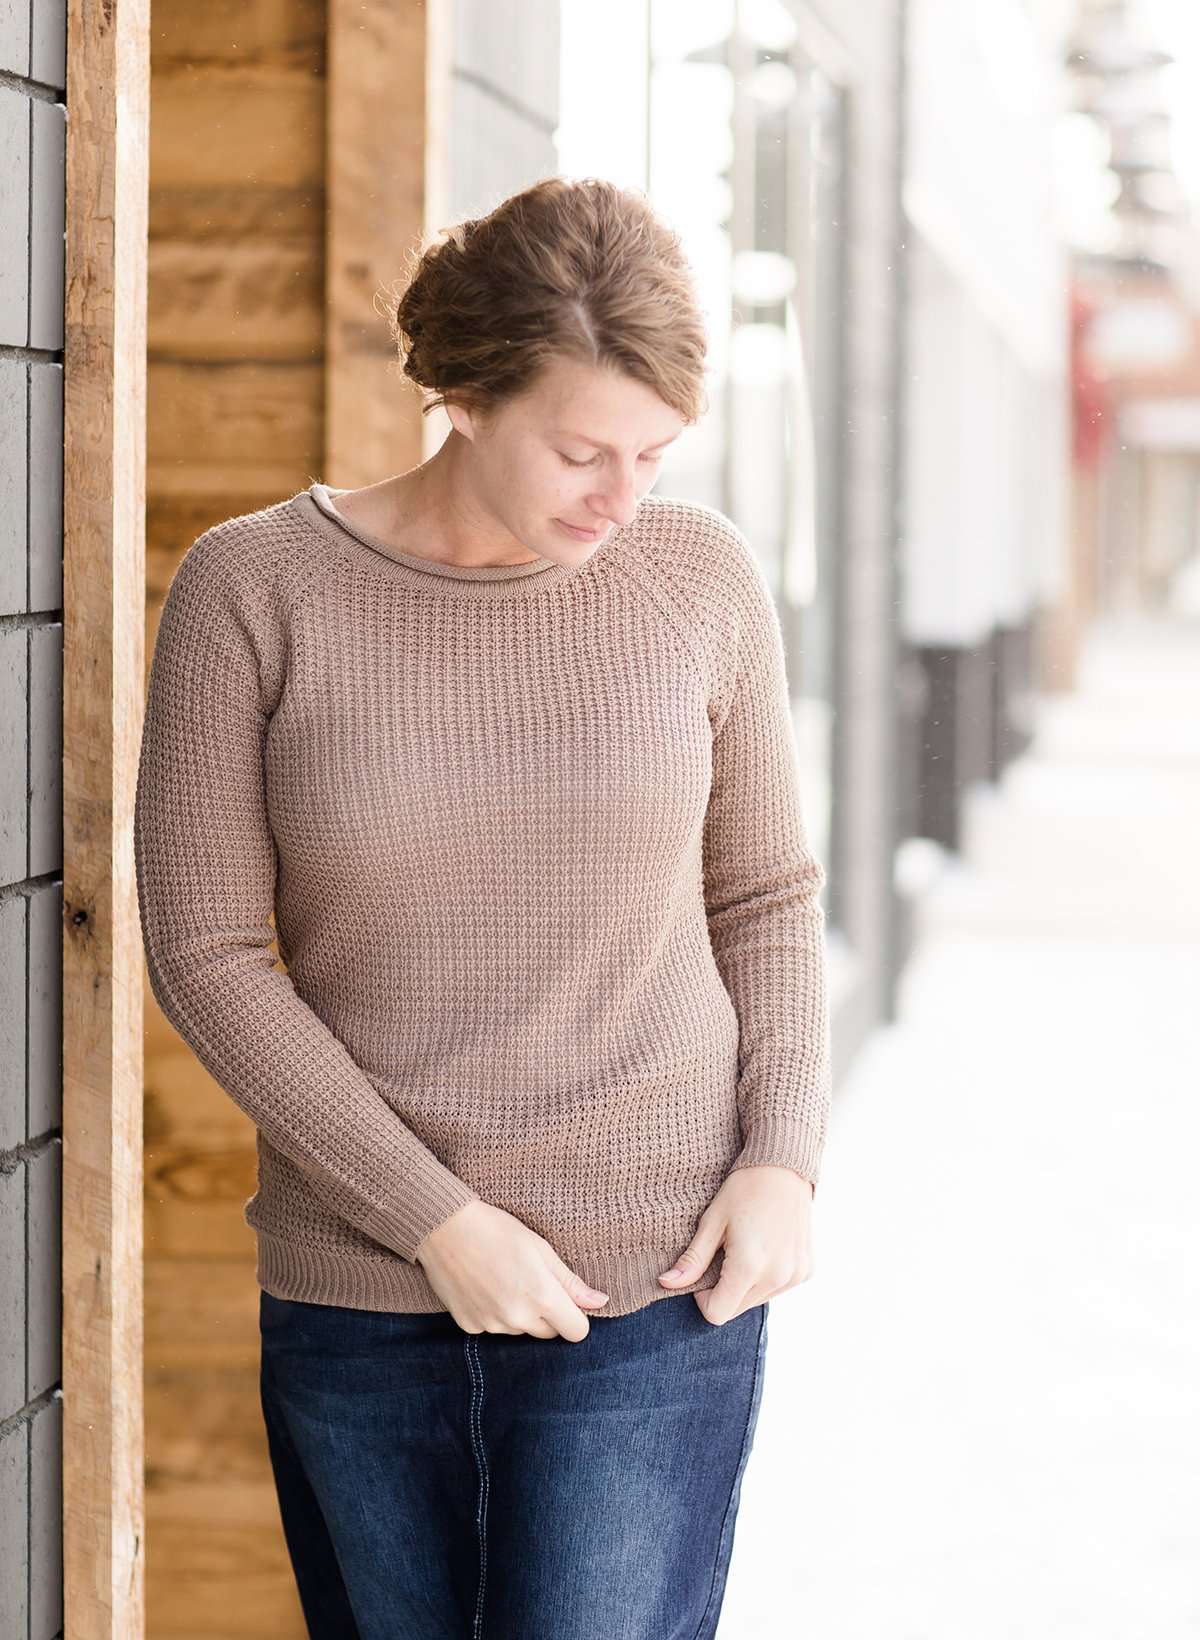 Woman wearing a waffle knit sweater that has a rollover neck hem and raglan style long sleeves. It is 100% acrylic and comes in mauve, navy, Burgundy and khaki.